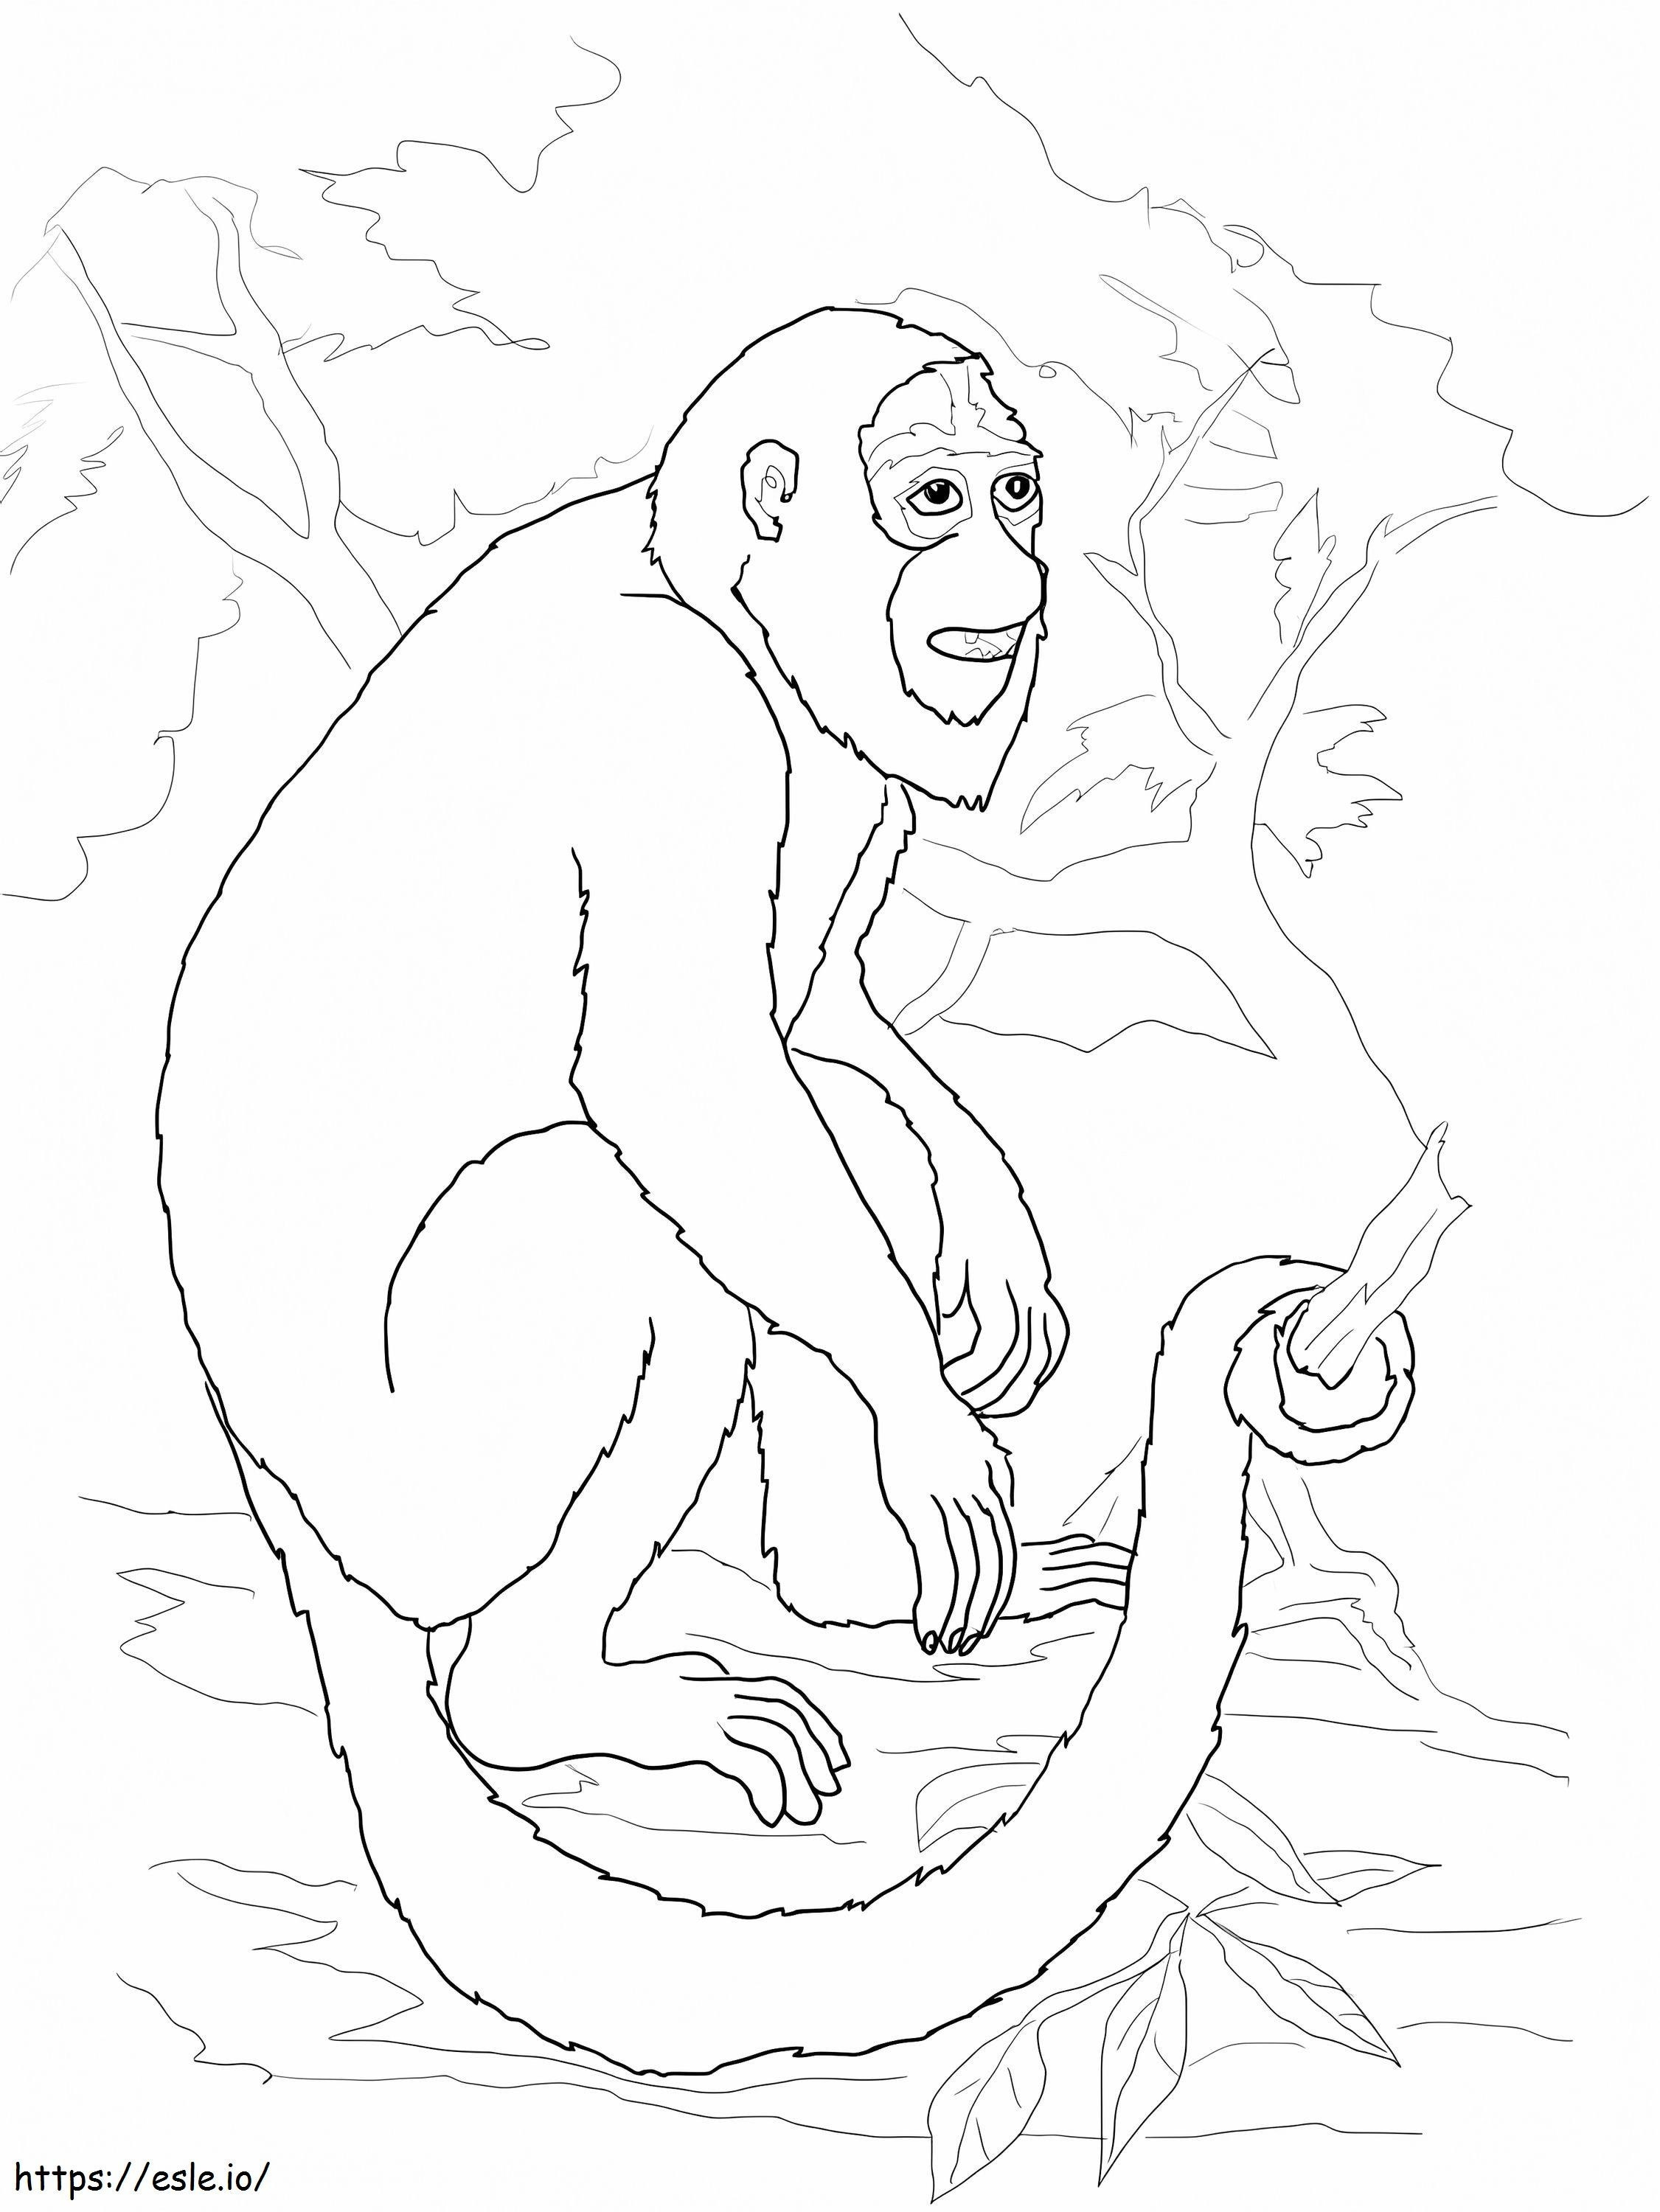 Howler Monkey coloring page